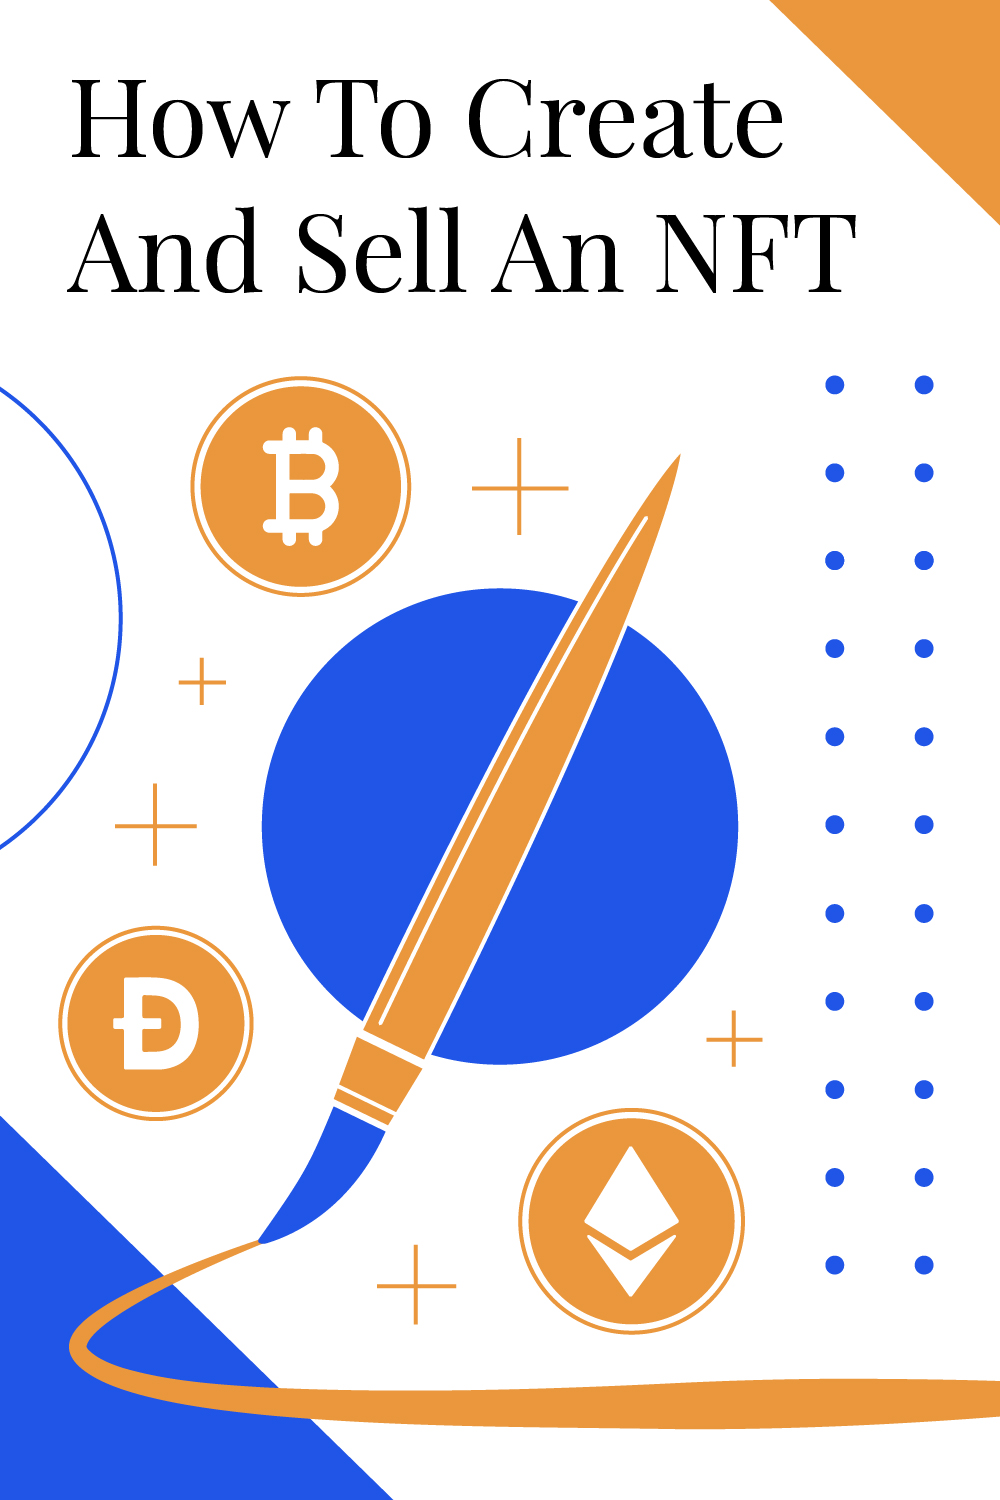 How To Create And Sell NTFs (Step-By-Step Guide)